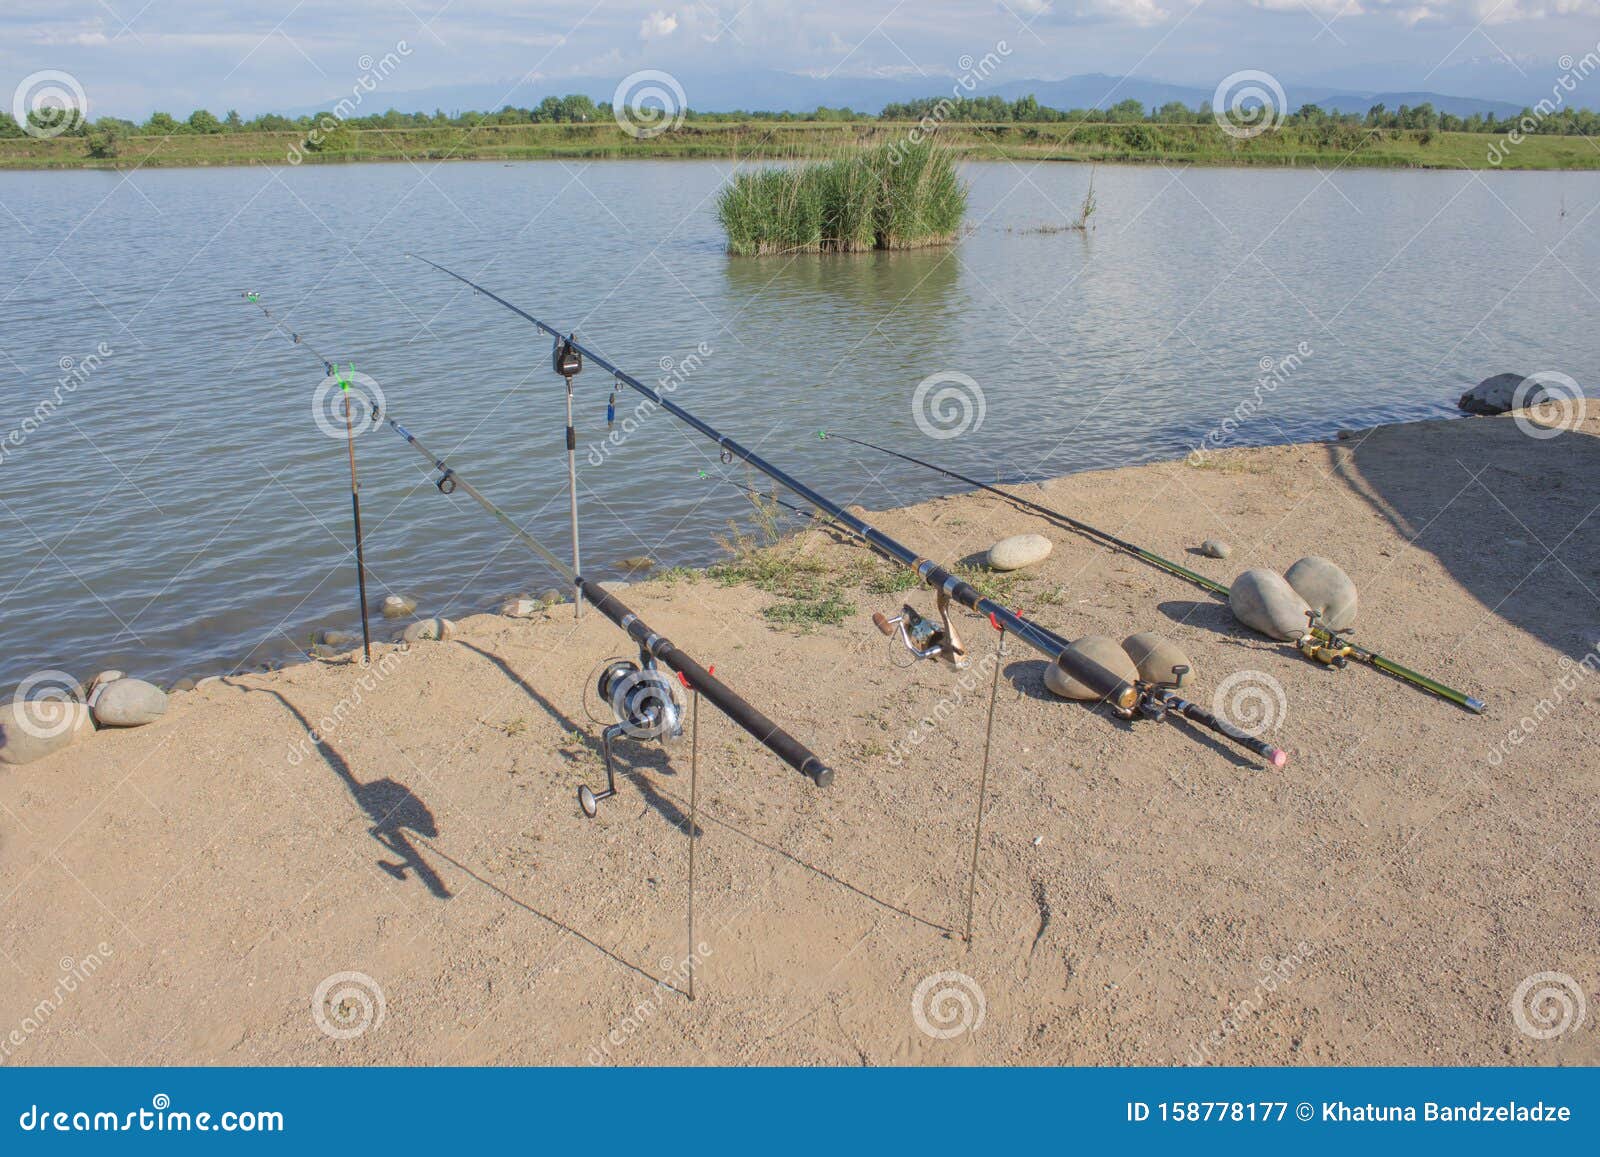 Freshwater Angling with Rods beside a Lake. Fishing Rod on a Prop and Water  Background Stock Image - Image of fisher, catch: 158778177